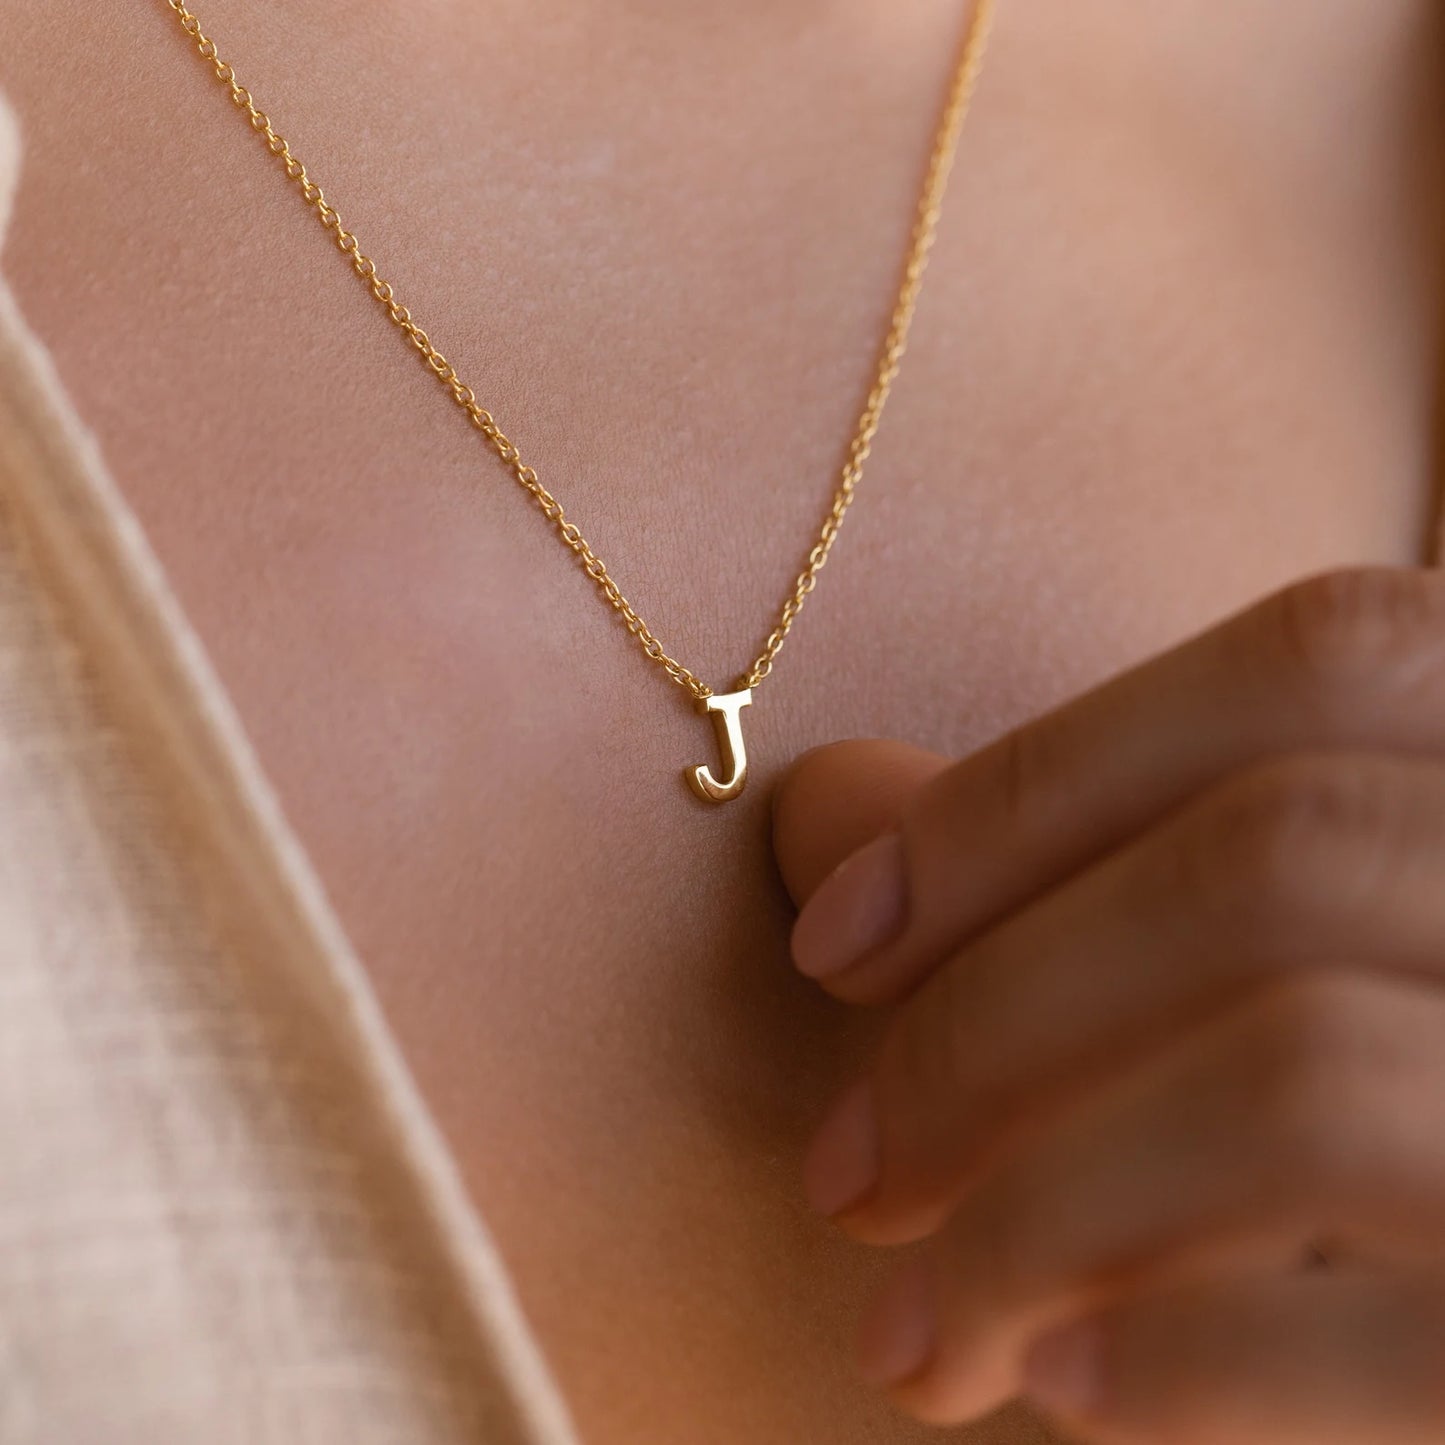 Gold initial necklace featuring exquisite craftsmanship, perfect for adding a touch of personalized elegance to your style.